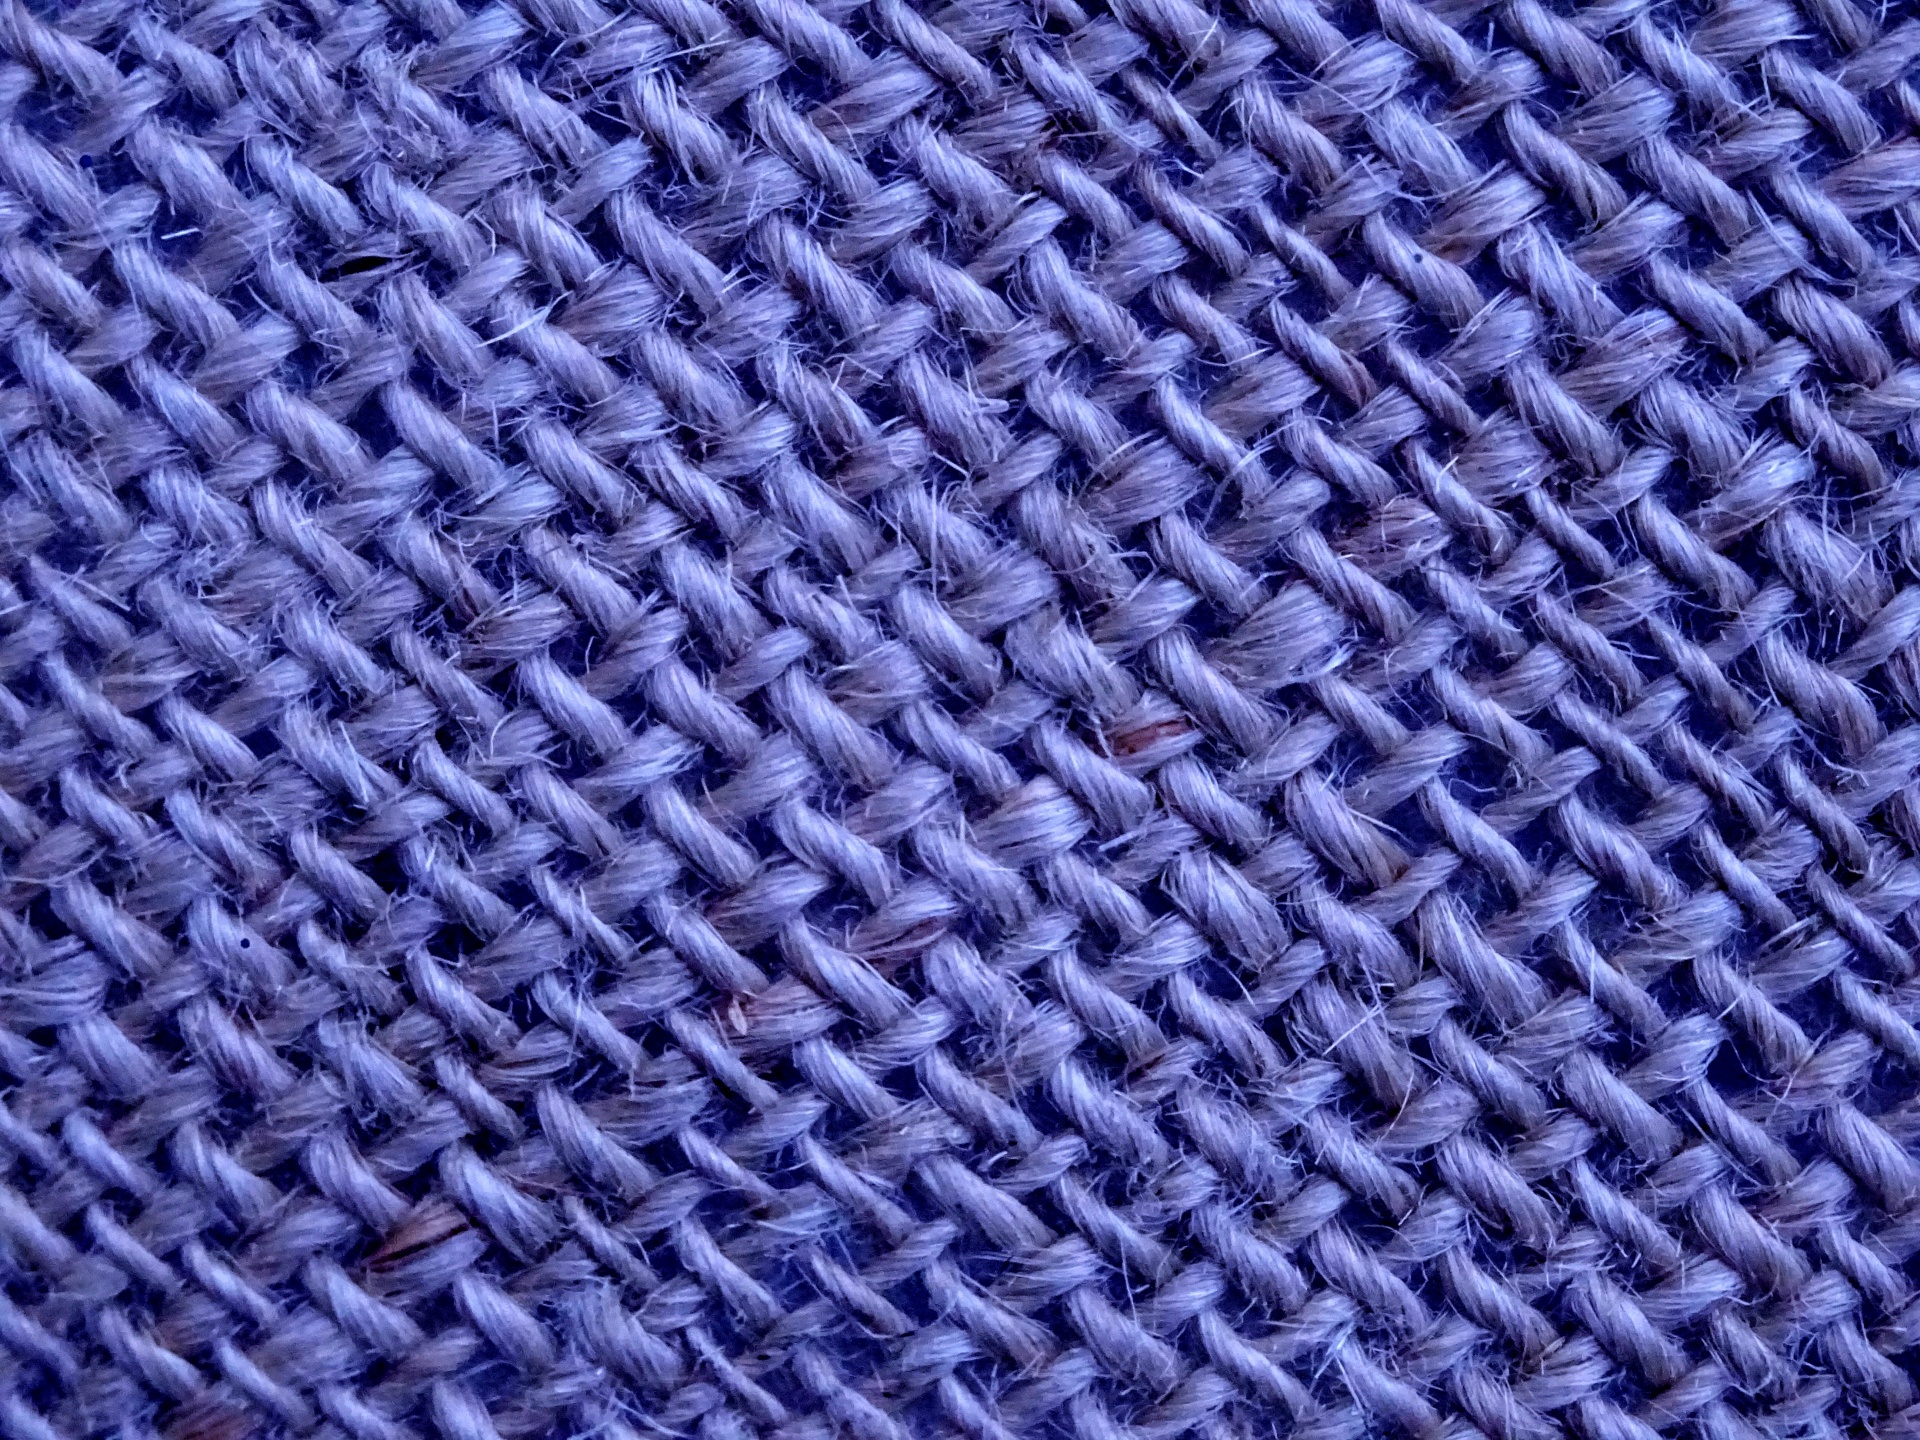 Lilac Woven Twine Background